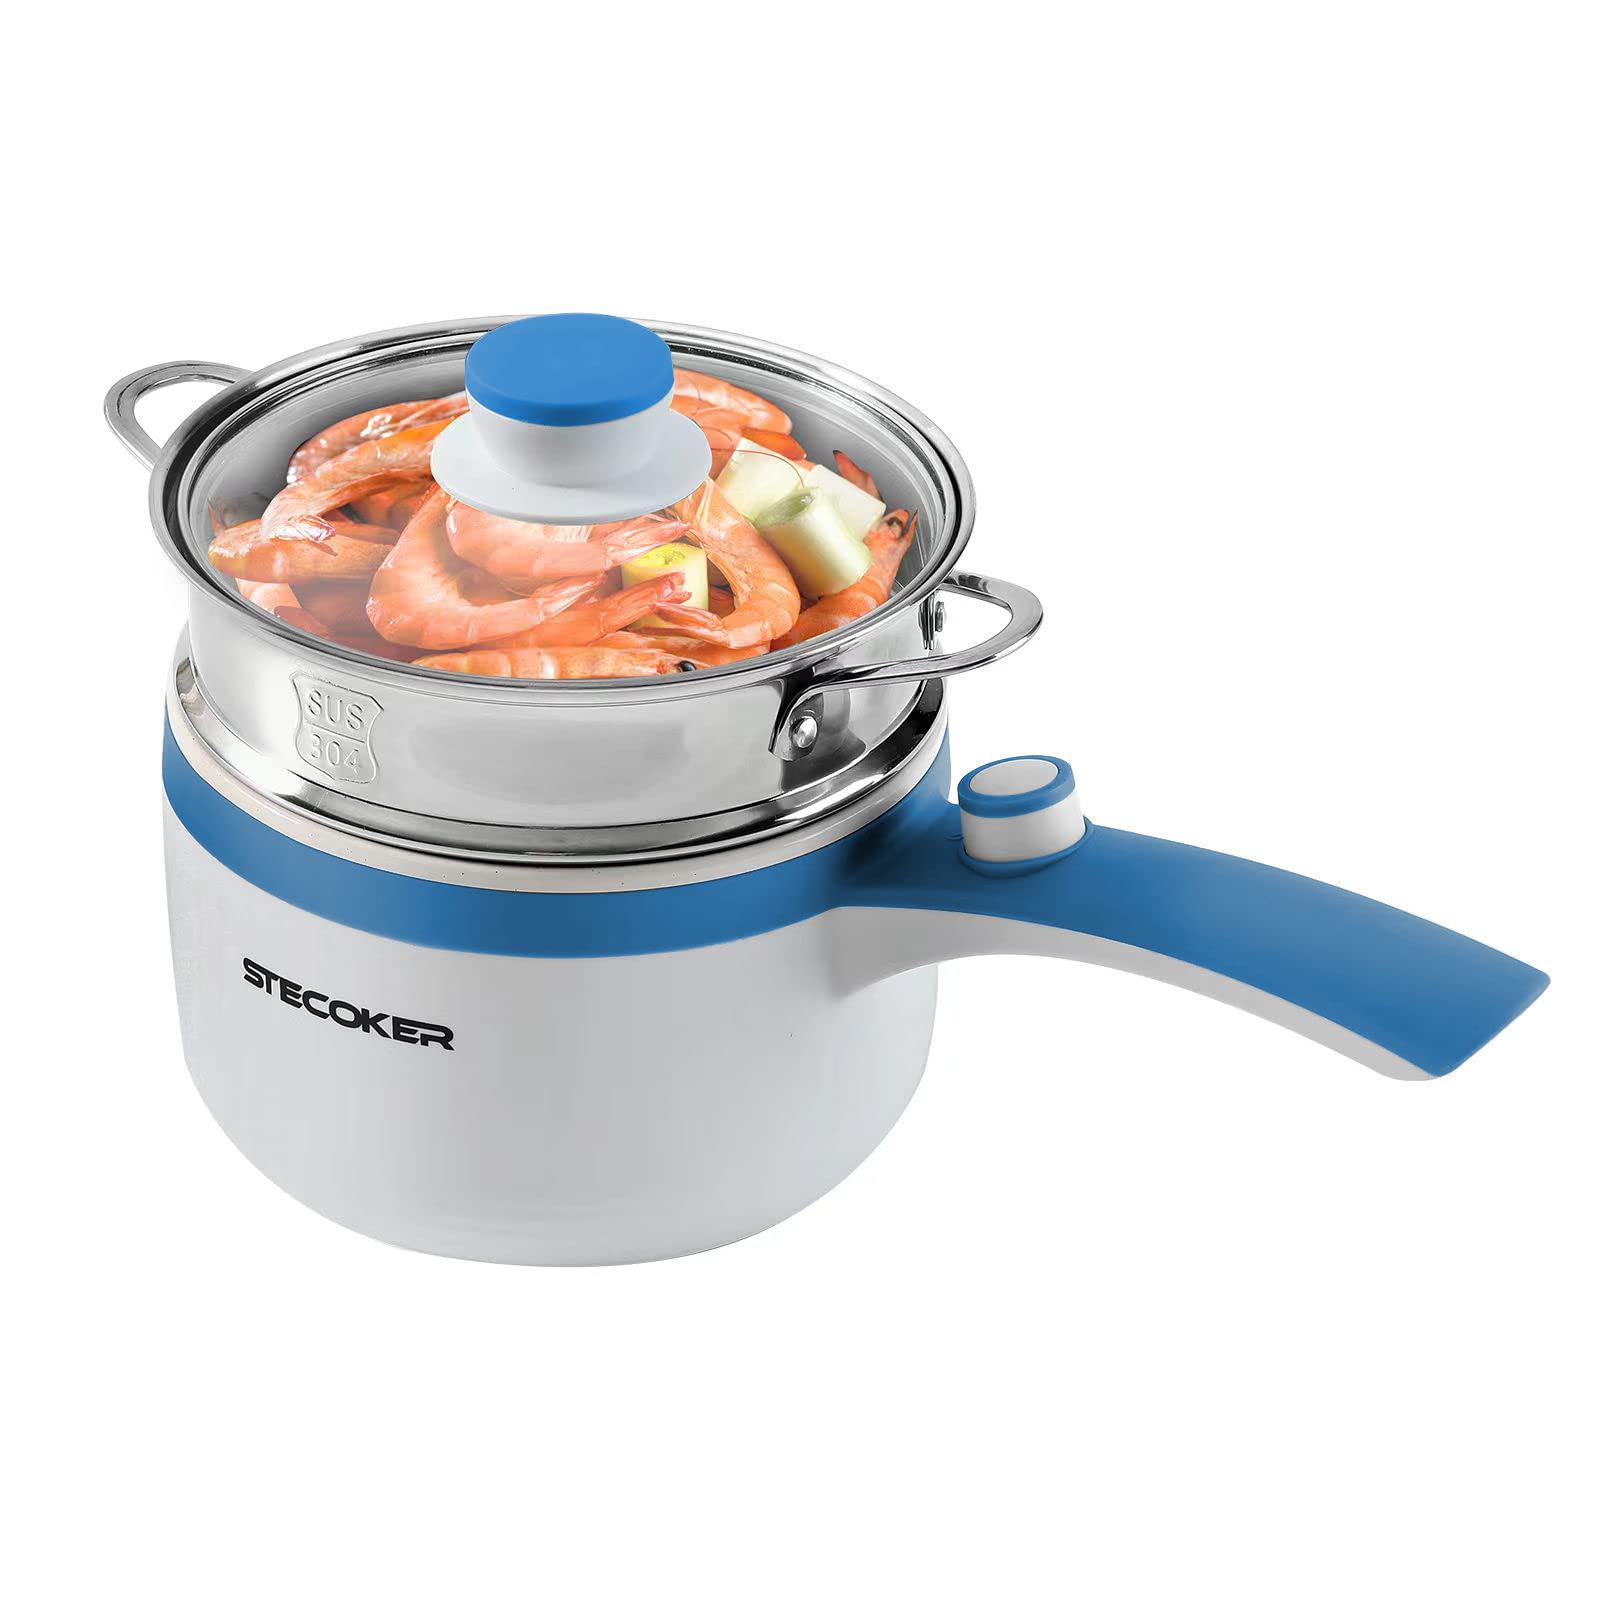 stecoker 1.5l electric hot pot with steamer, rapid noodles cooker, boil egg ramen oatmeal soup, fry rice, white and blue (xh-